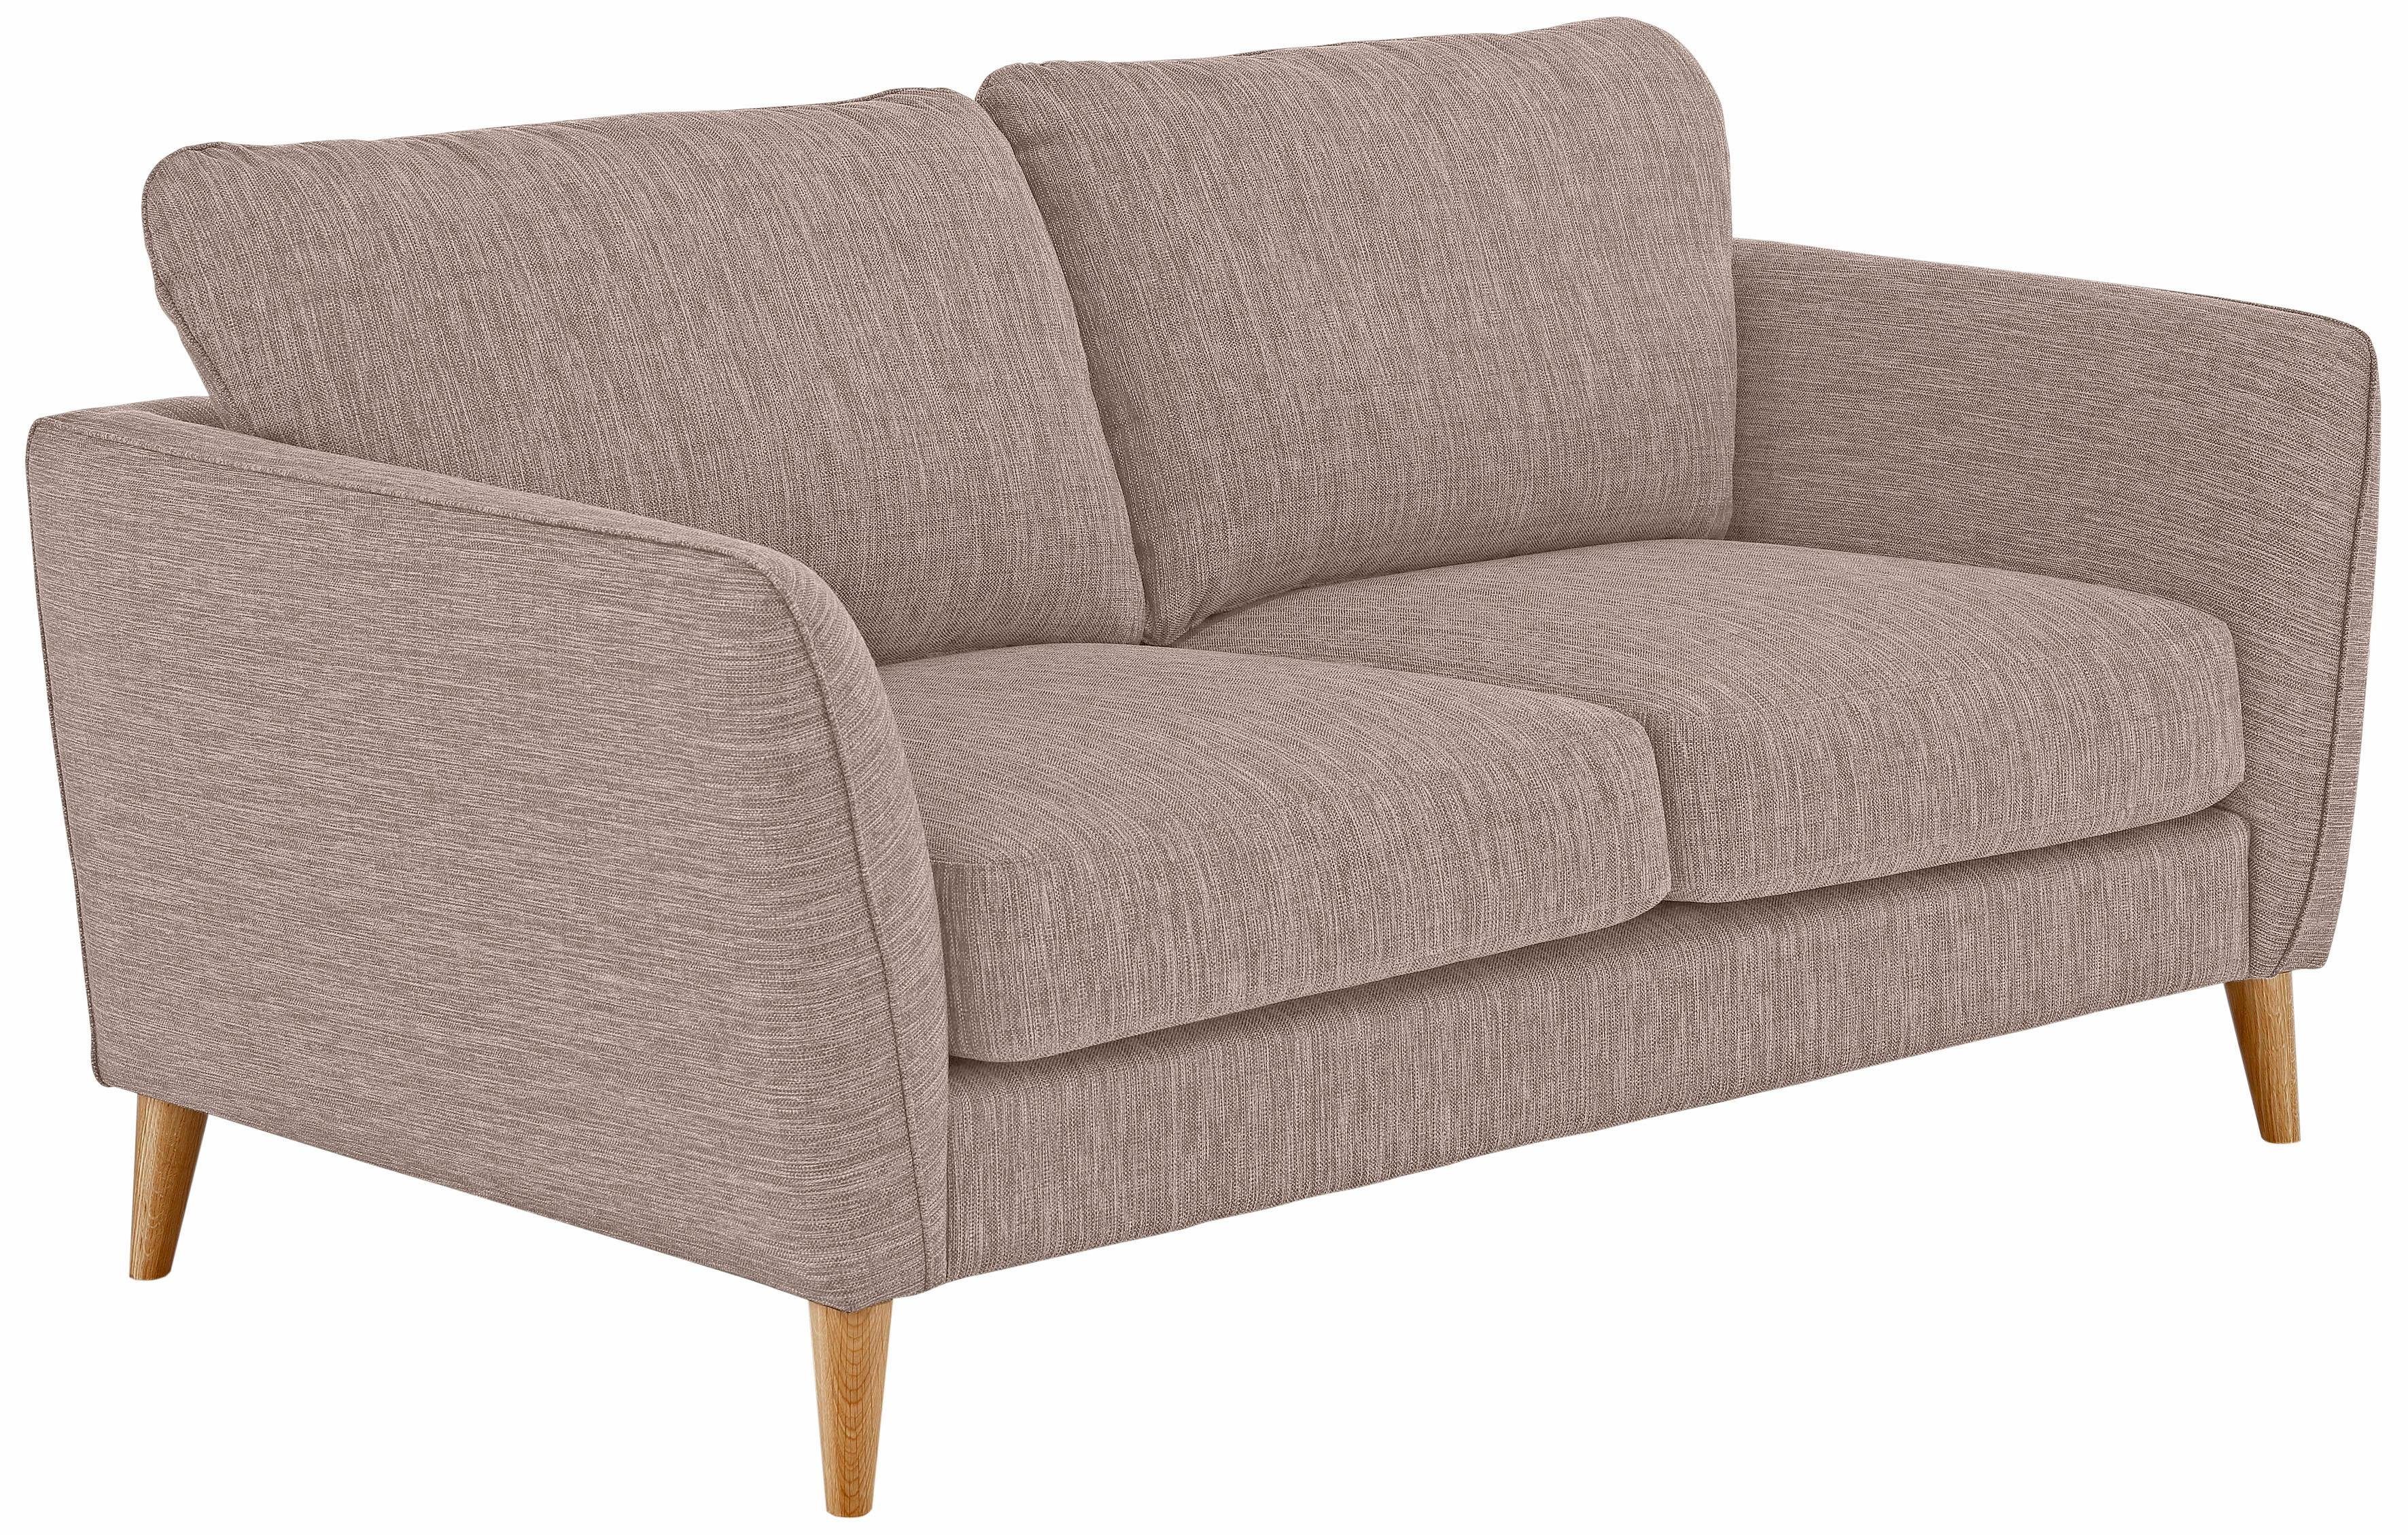 Teenager Sofas online OTTO | Couches kaufen Teenager »